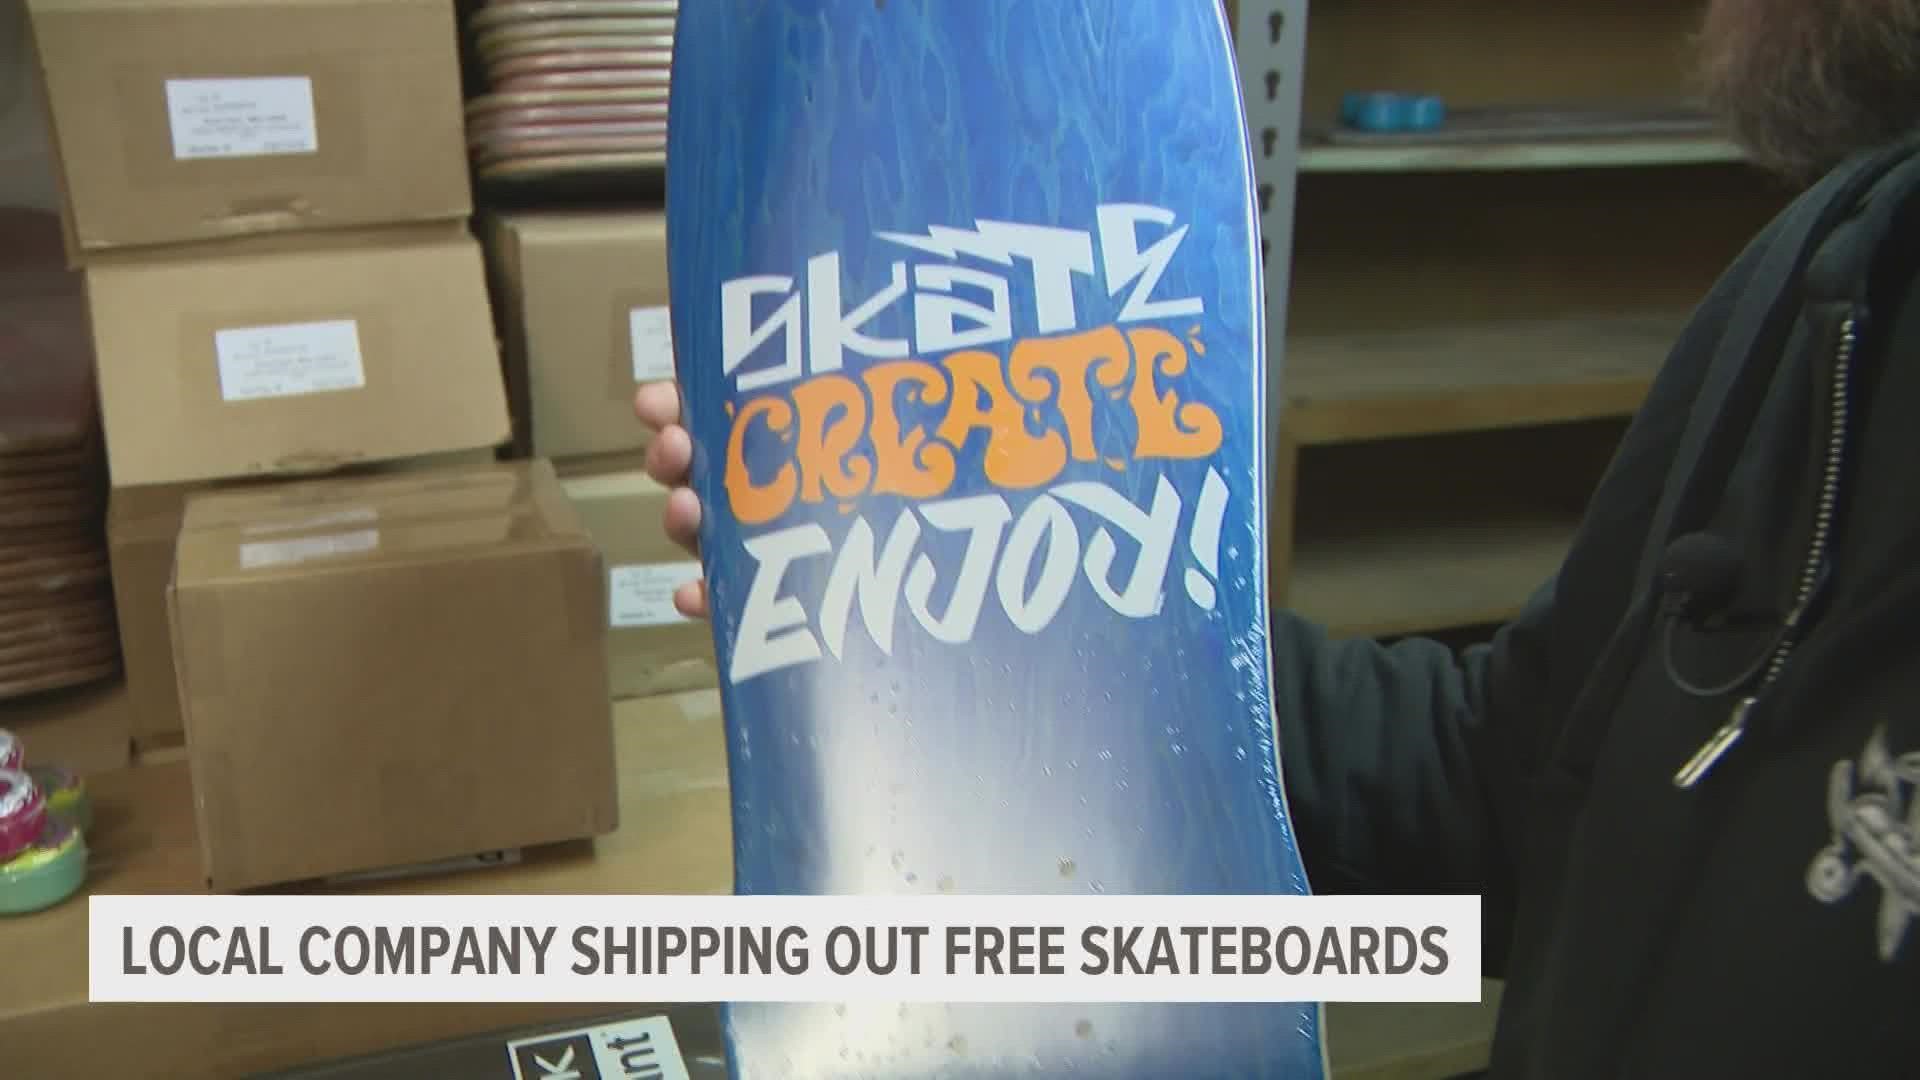 Mike Vallely of Street Plant Skateboards decided he wanted to get more skateboards into the hands of kids this holiday season.